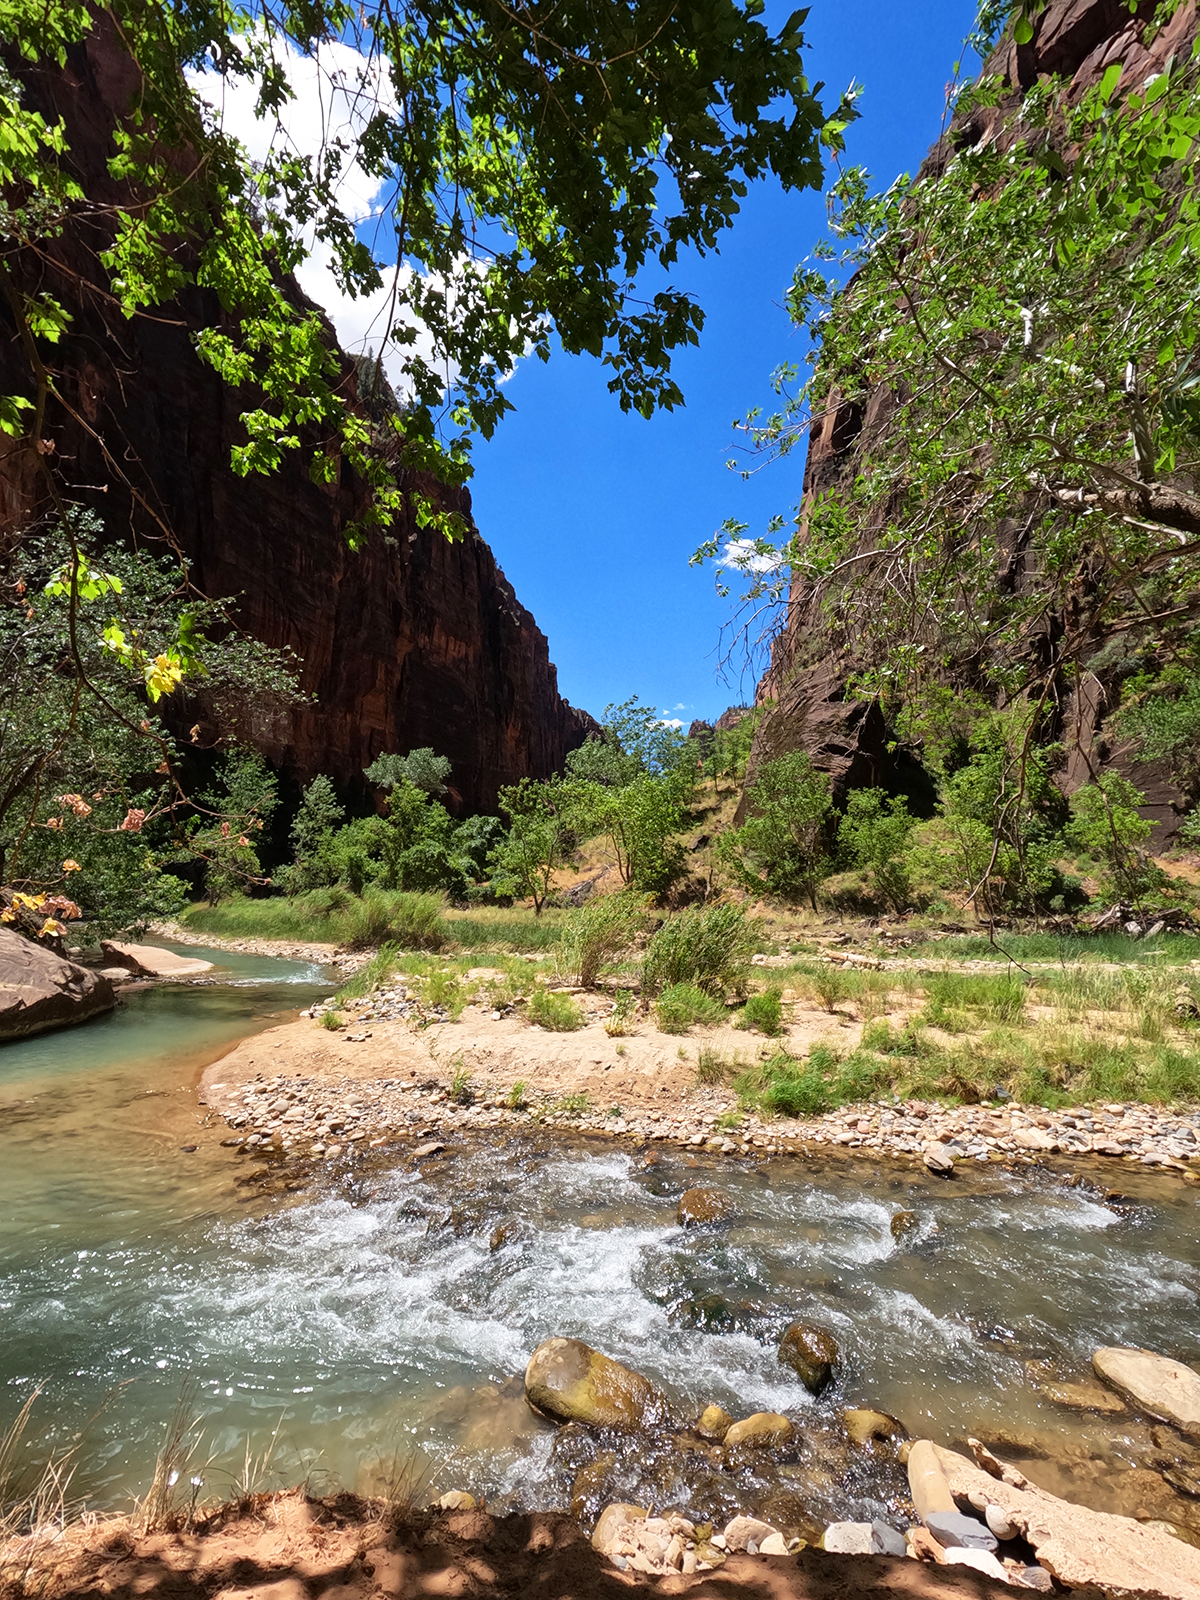 Zion national park family vacation view of river through canyon with trees